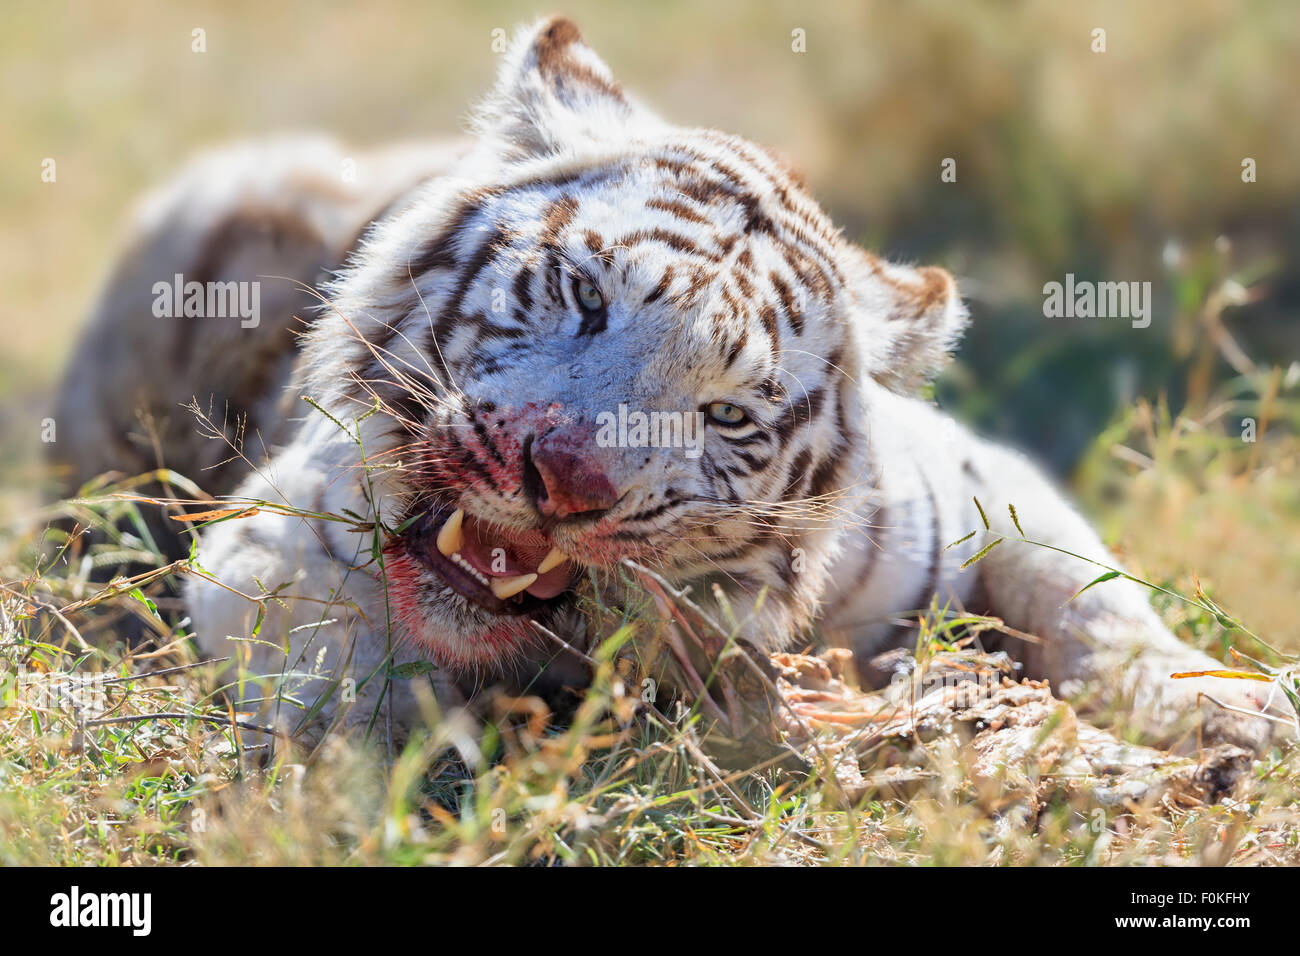 South Africa, bengal tiger eating Stock Photo